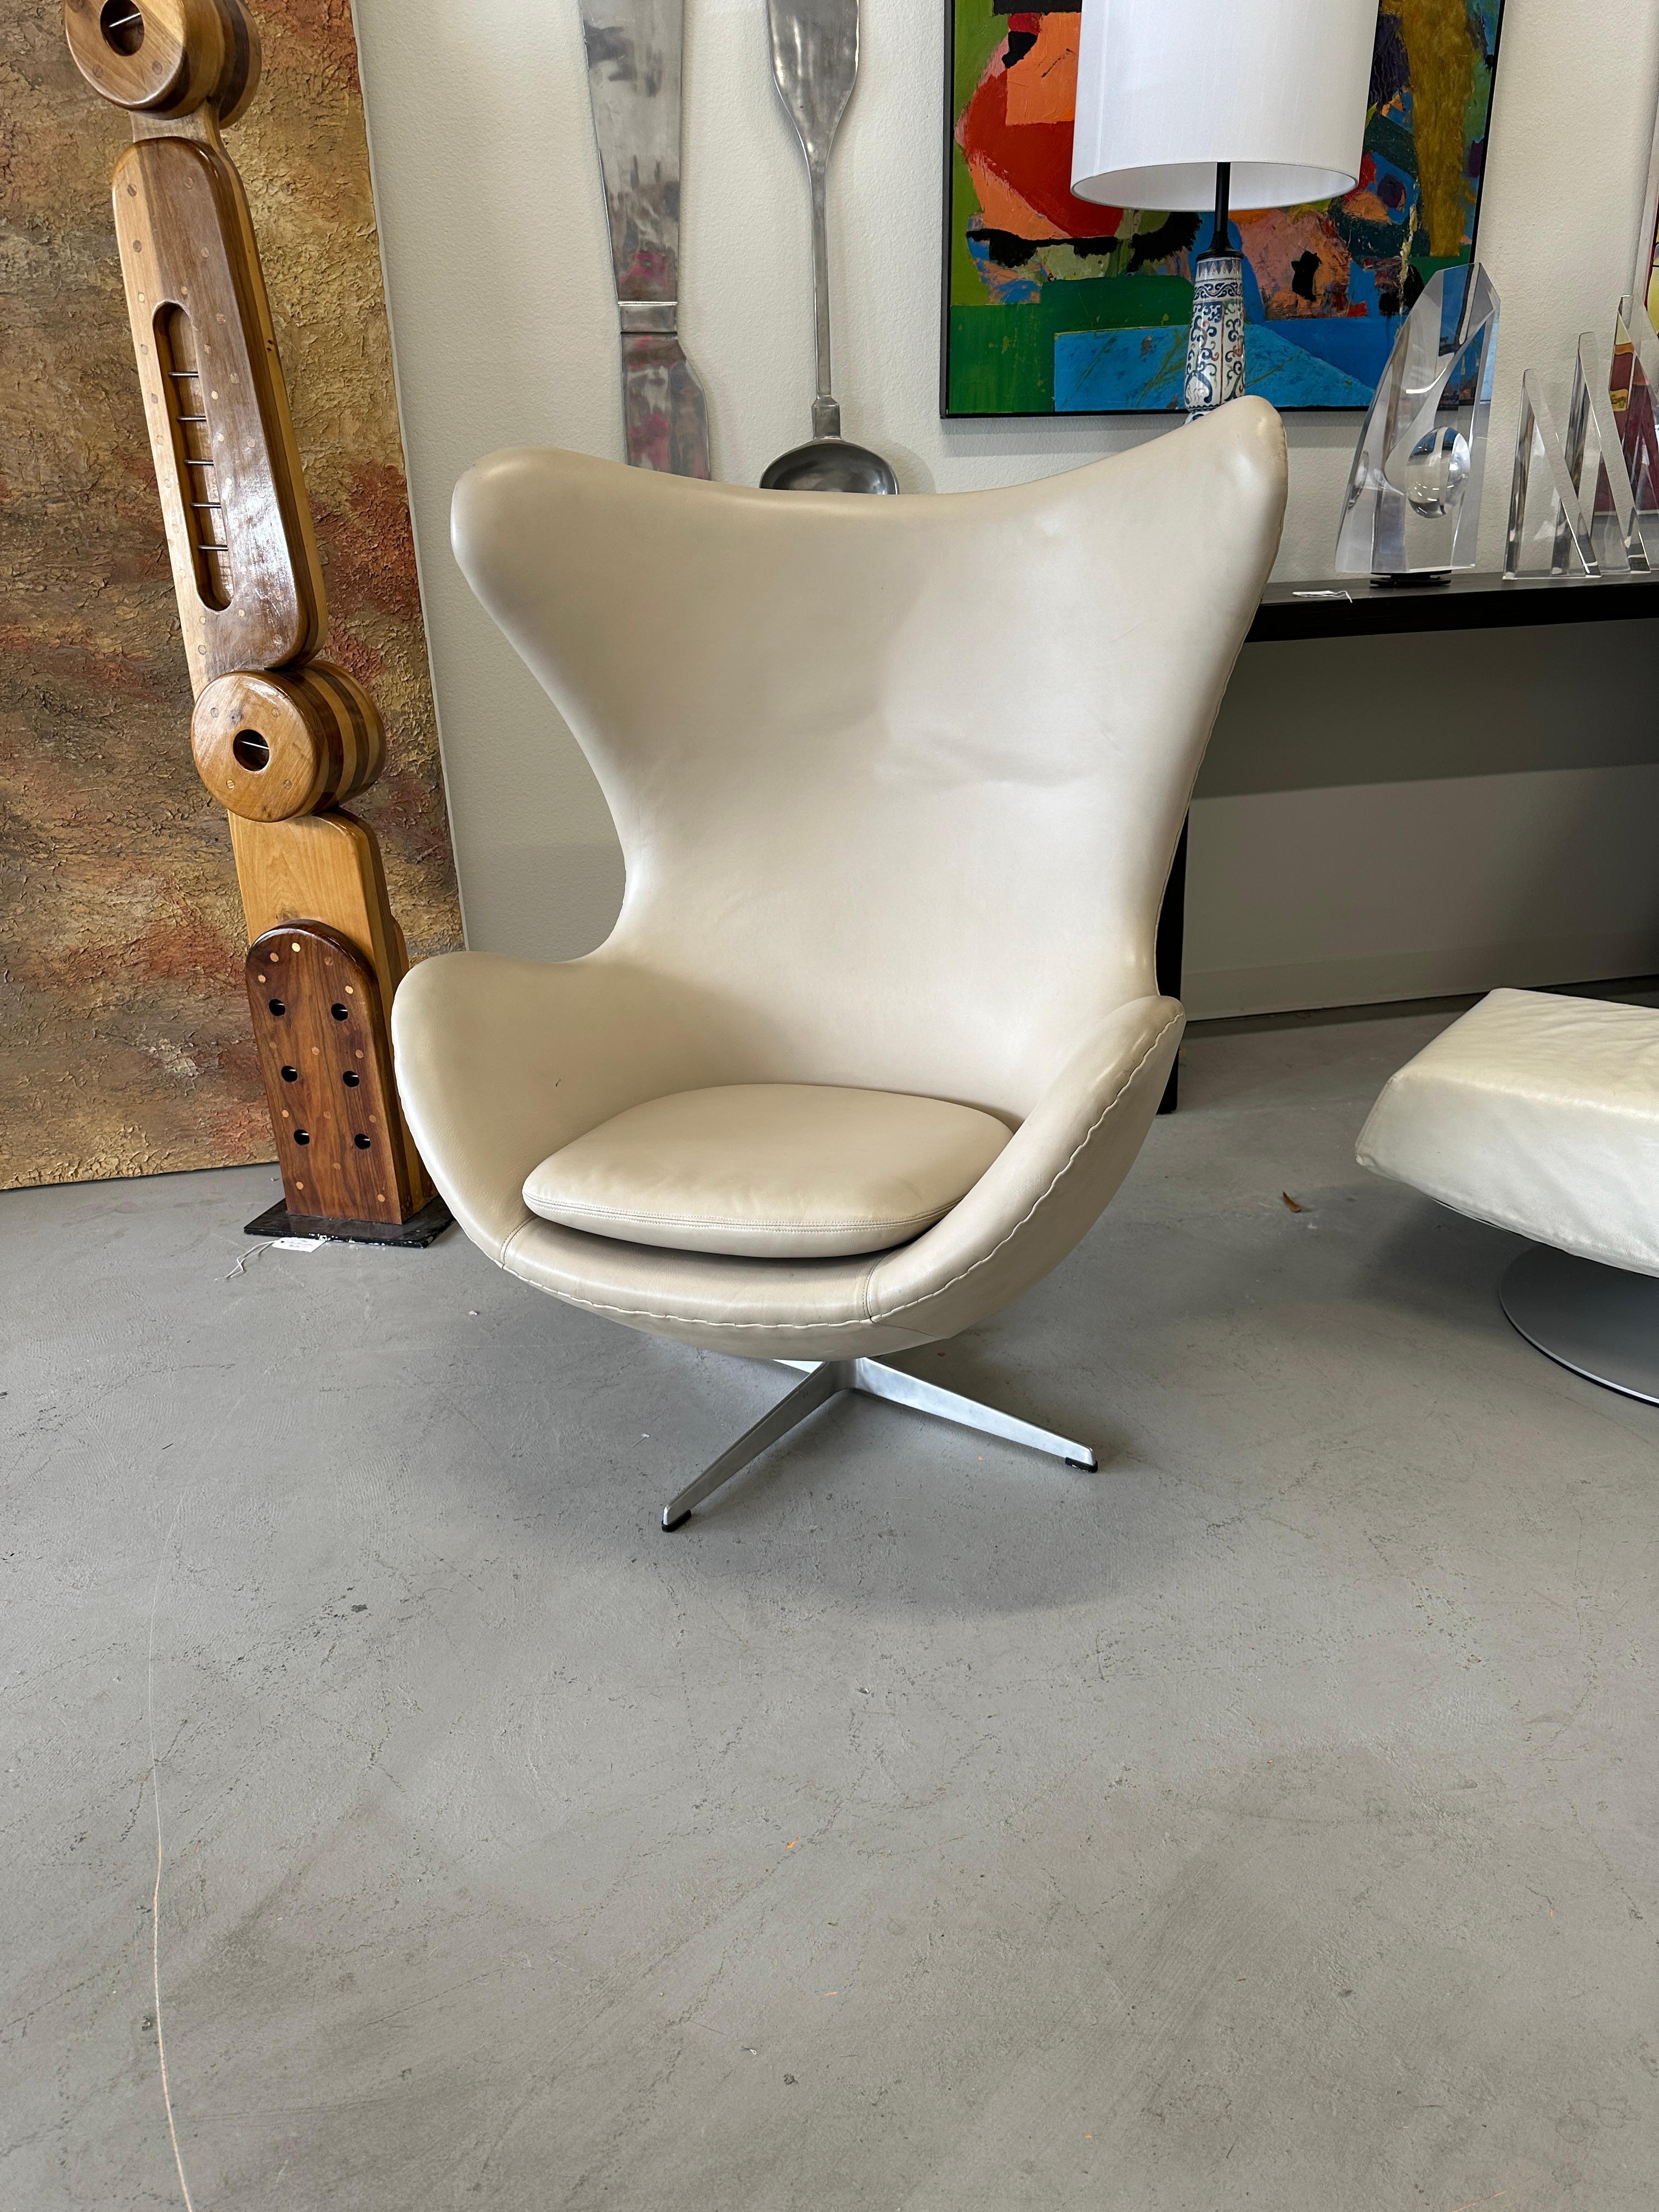 A wonderful beige colored leather egg chair by Arne Jacobsen for Fritz Hansen. It has the date code 0466 indicating a production date of 1966. 
The chair post and the chair bottom has foil labels.  
Overall in good condition for its age with some